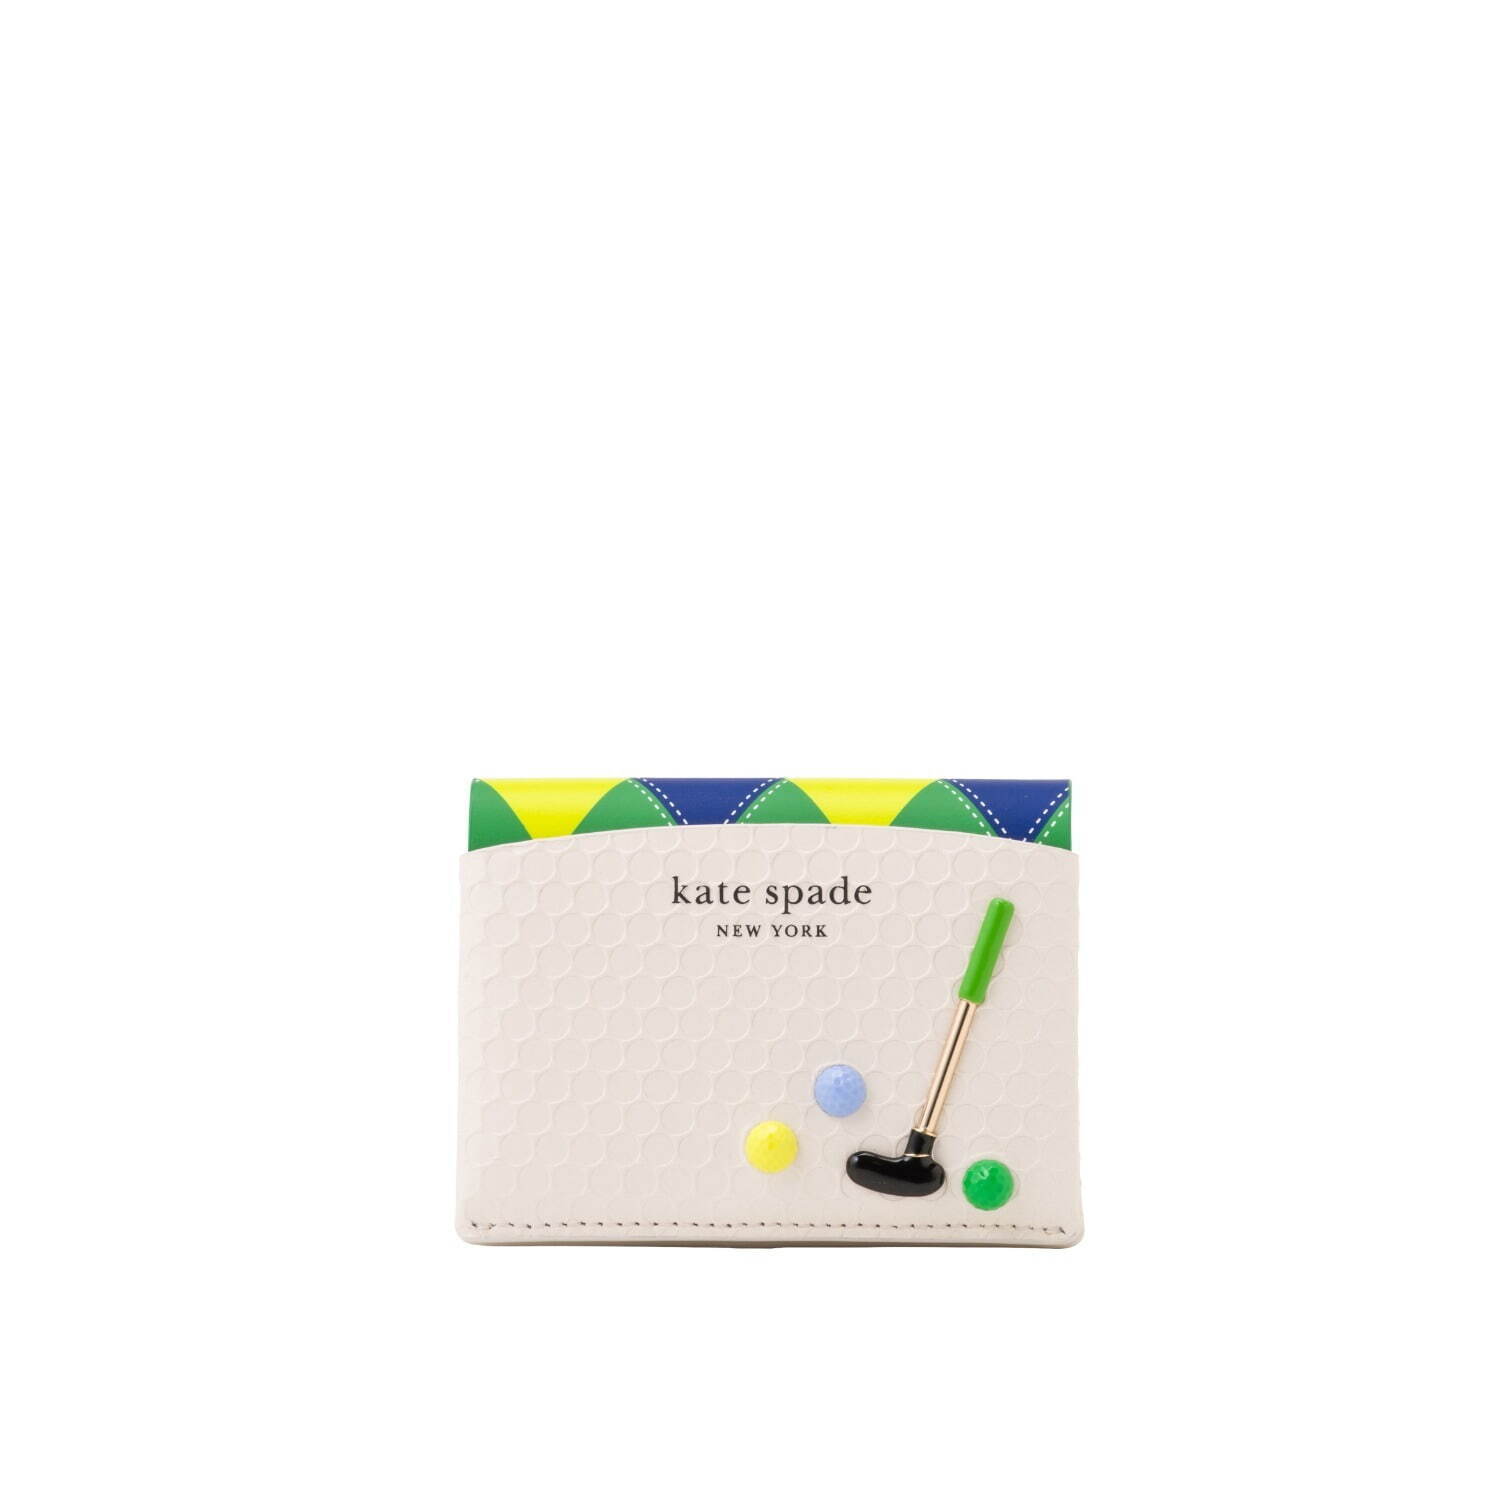 TEE TIME PRINTED TEXTURED LEATHER card case
24,200円
※3月上旬発売予定